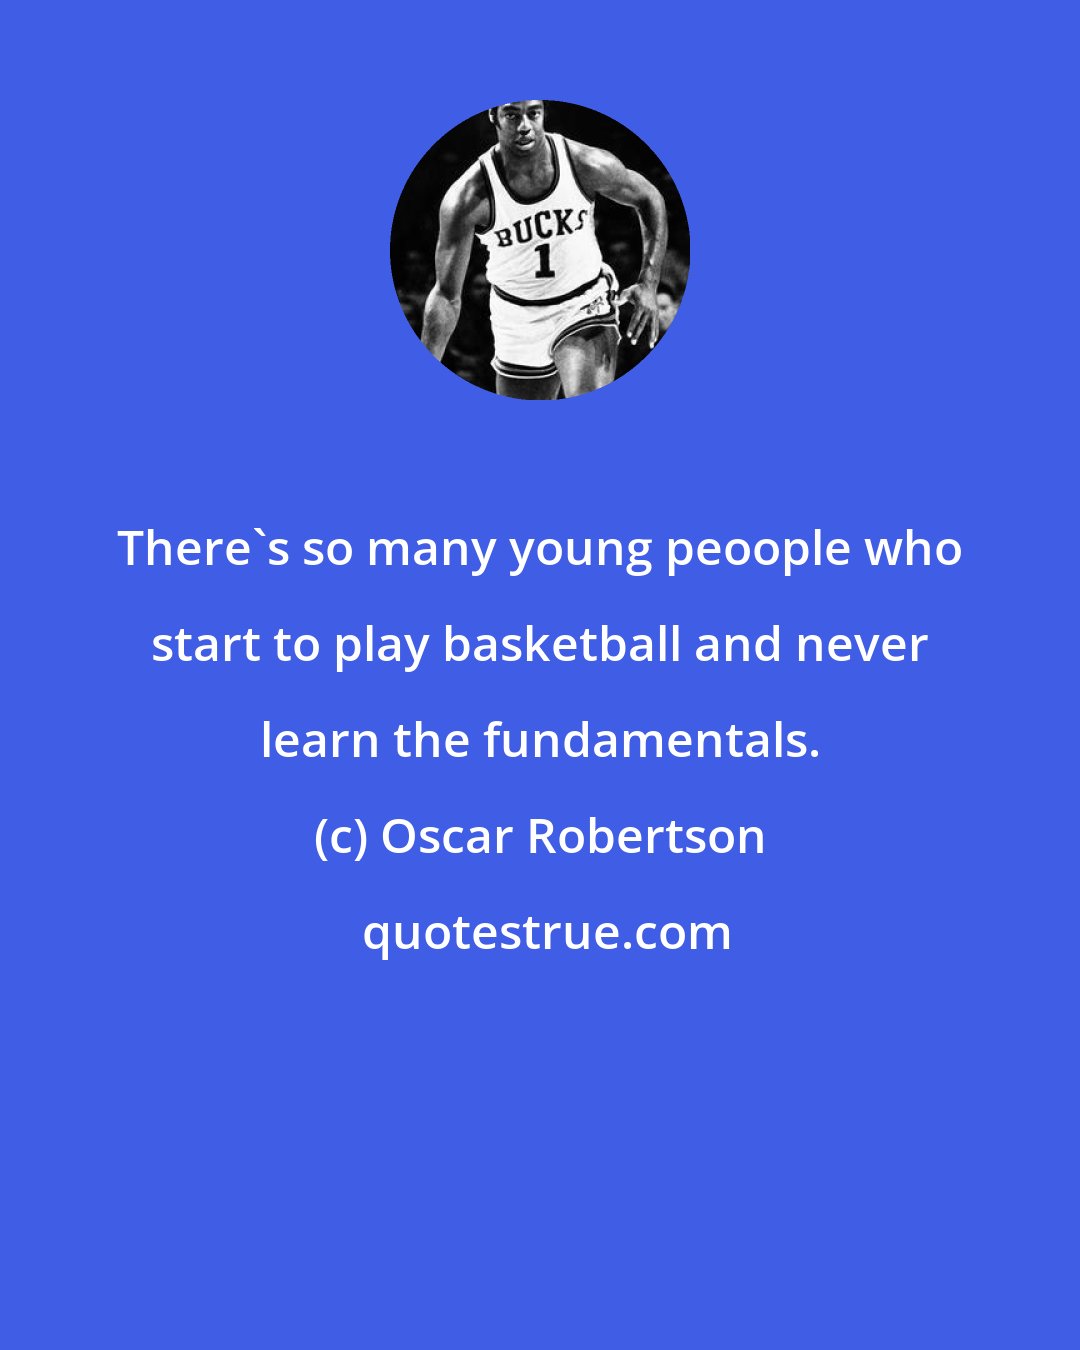 Oscar Robertson: There's so many young peoople who start to play basketball and never learn the fundamentals.